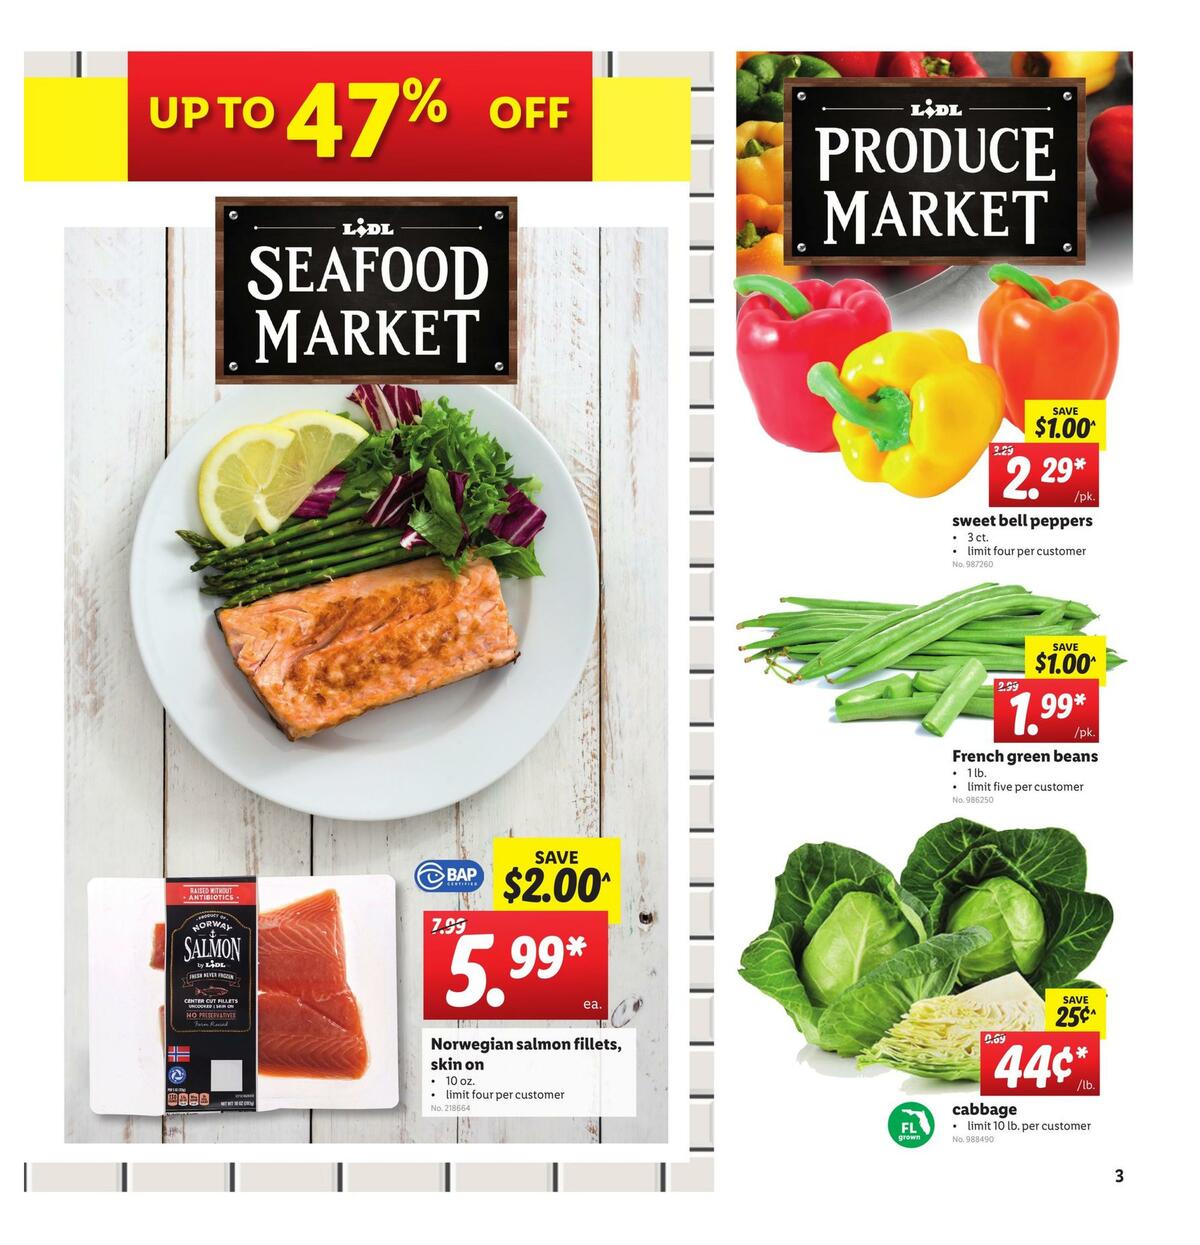 LIDL Weekly Ad from May 6